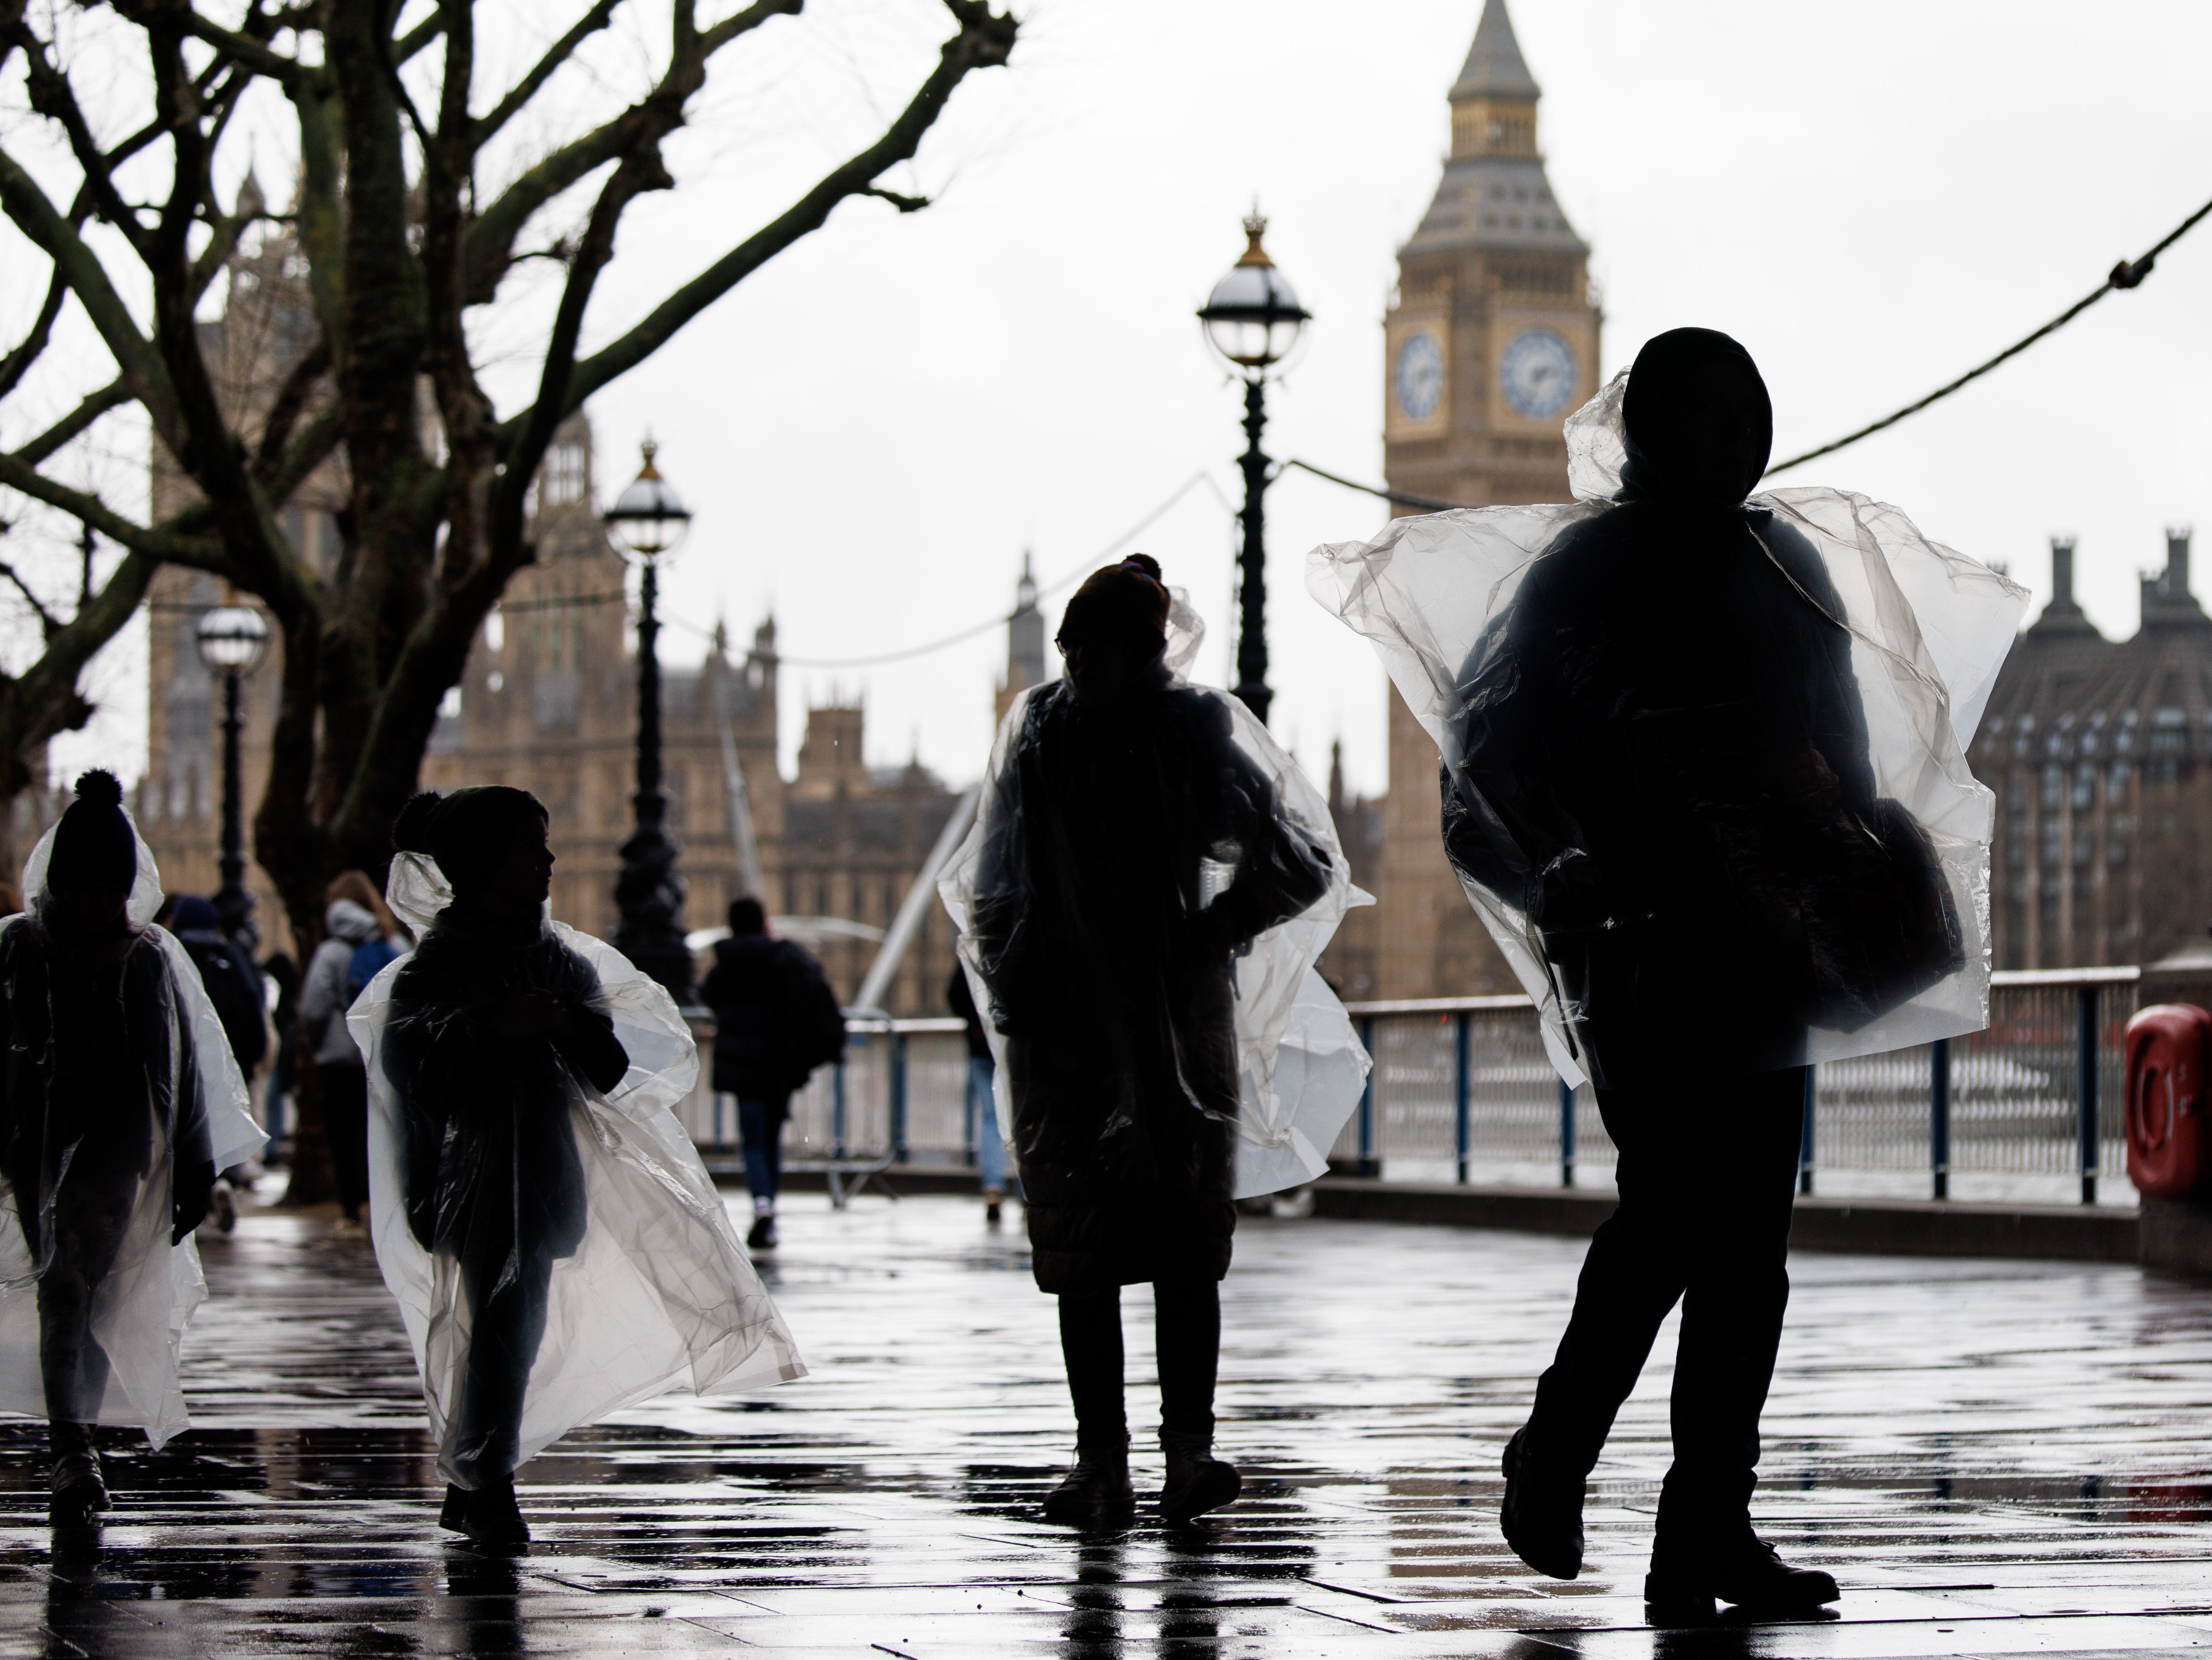 A family kits up in plastic raincoats in central London